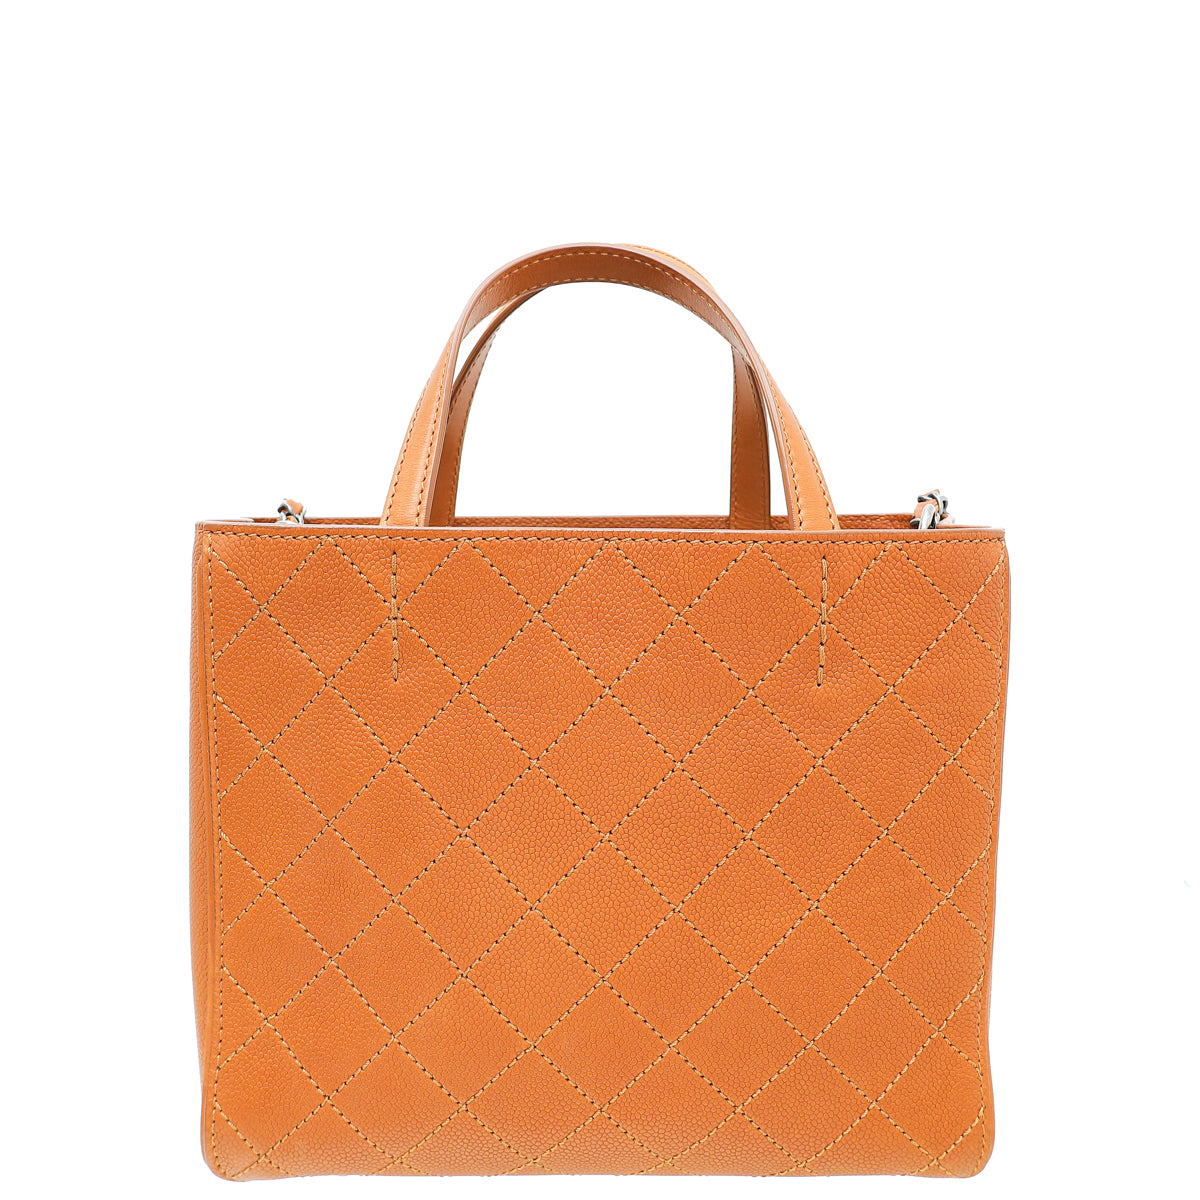 Chanel Brown Tan CC Covered Chain Tote Bag – The Closet